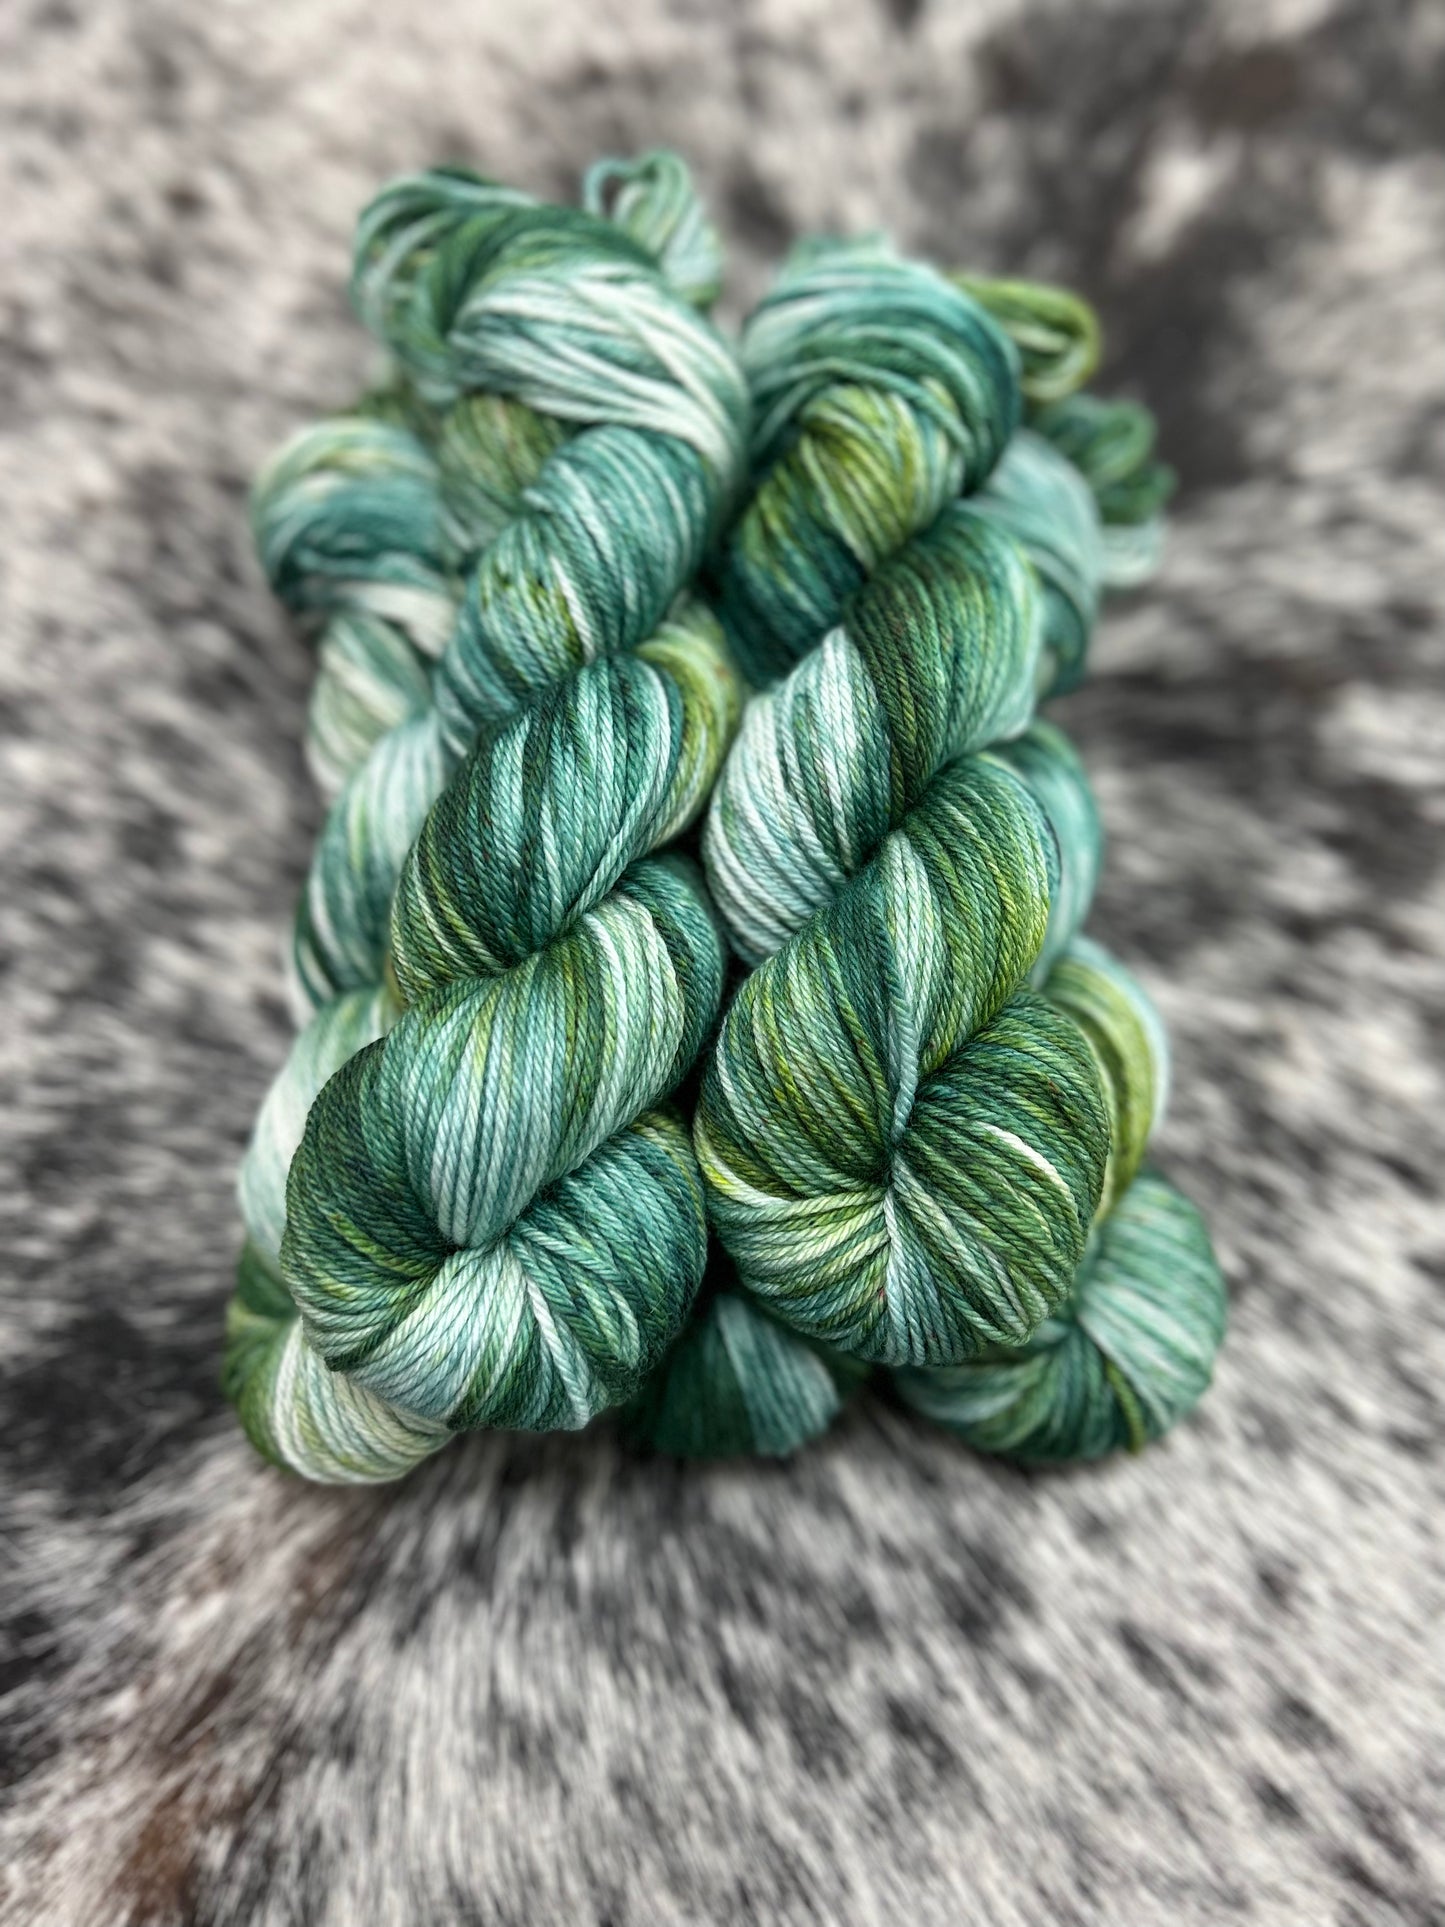 "Green With Envy" Hand-Dyed Yarn